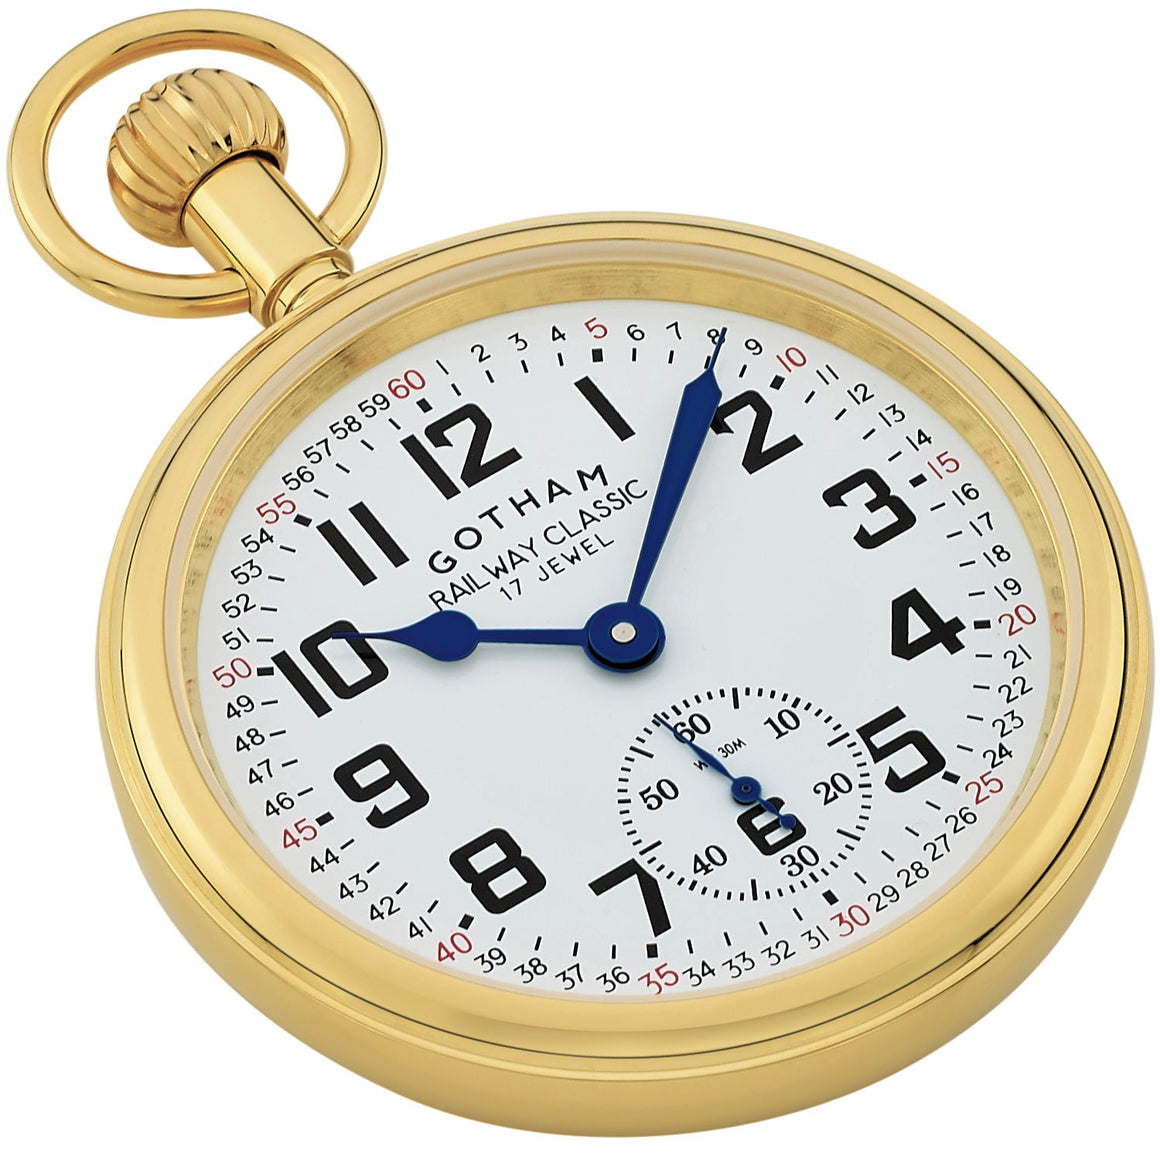 Gotham Men's Gold Plated Stainless Steel Mechanical Hand Wind Railroad Pocket Watch # GWC14111G